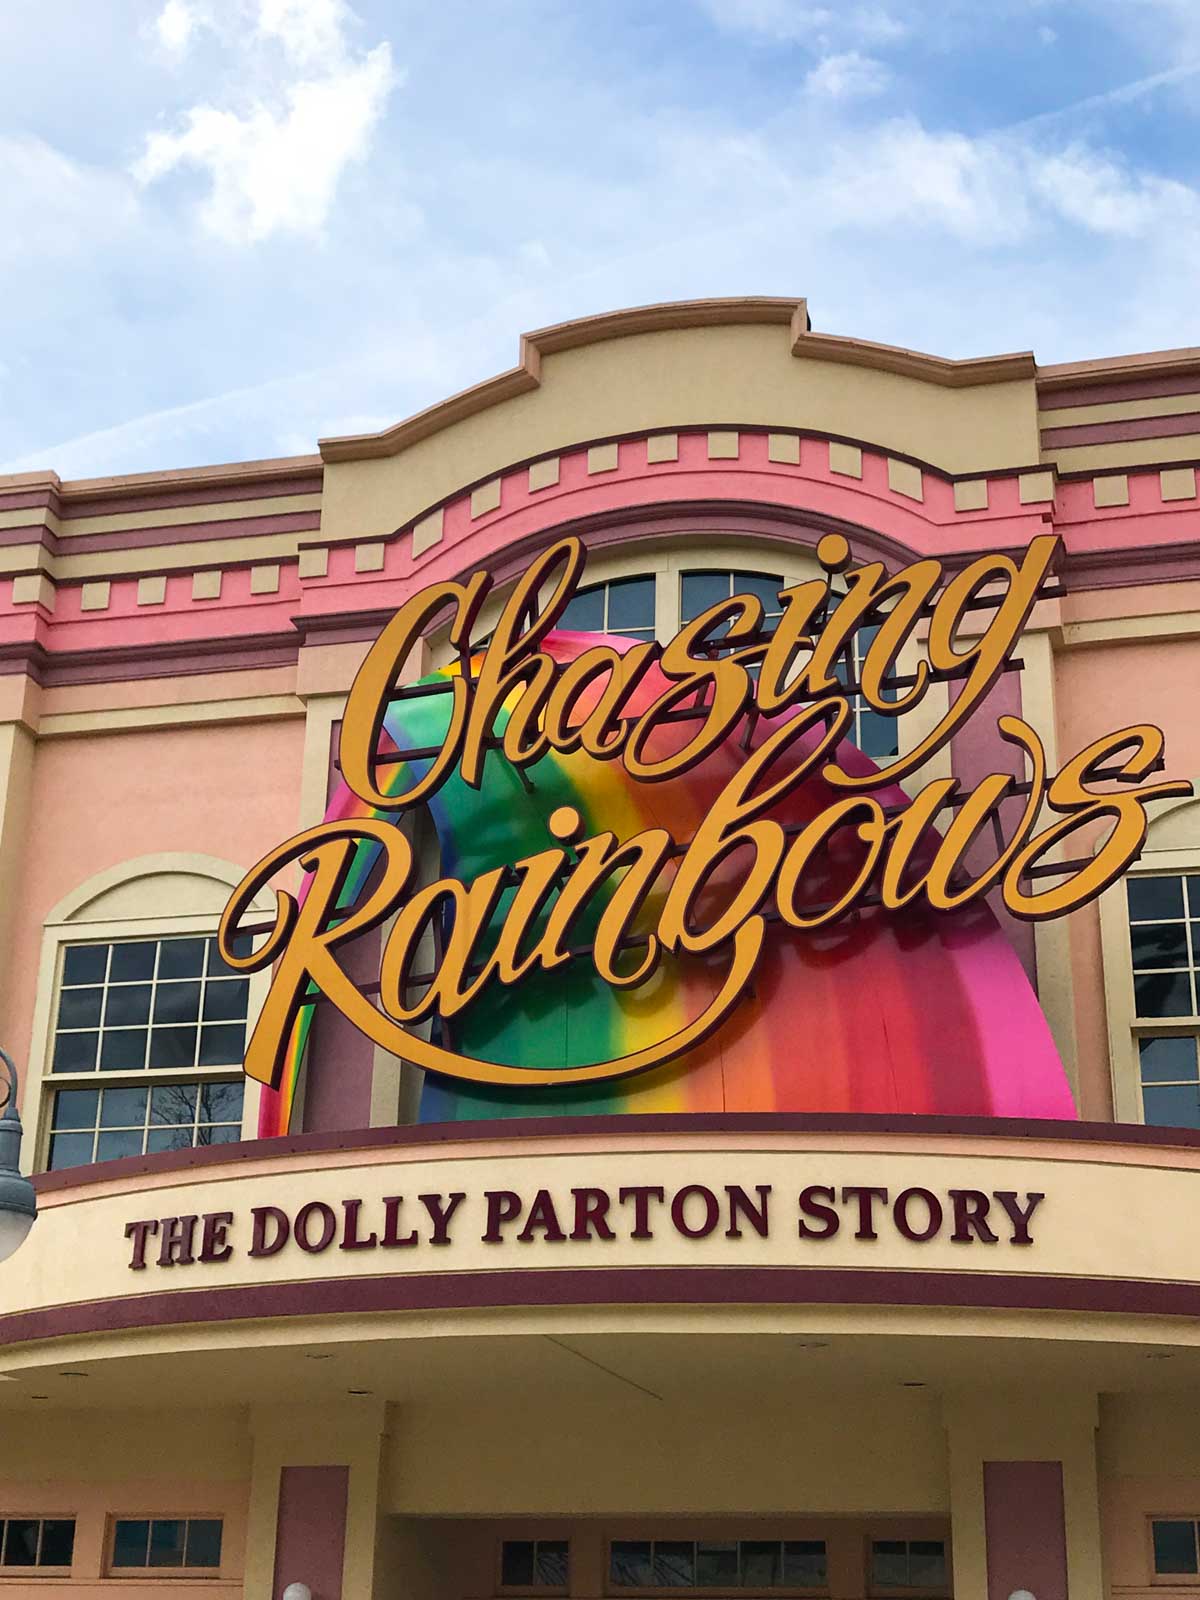 The outside sign to the Chasing Rainbows museum.